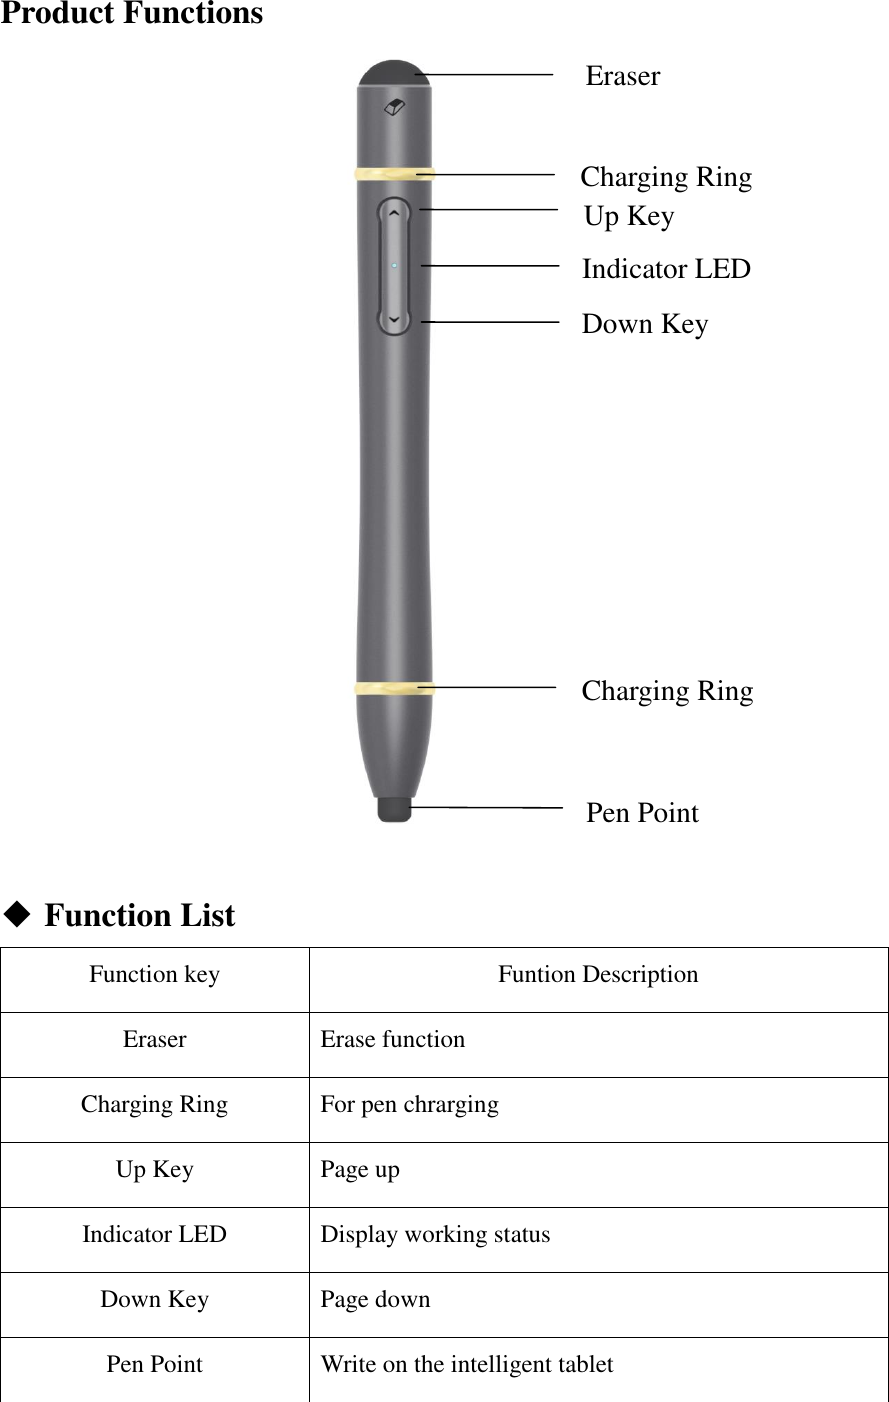 Product Functions                          Function List Function key Funtion Description Eraser Erase function Charging Ring For pen chrarging Up Key Page up Indicator LED Display working status Down Key Page down Pen Point Write on the intelligent tablet Eraser EK Up Key Indicator LED Down Key Pen Point Charging Ring Charging Ring 